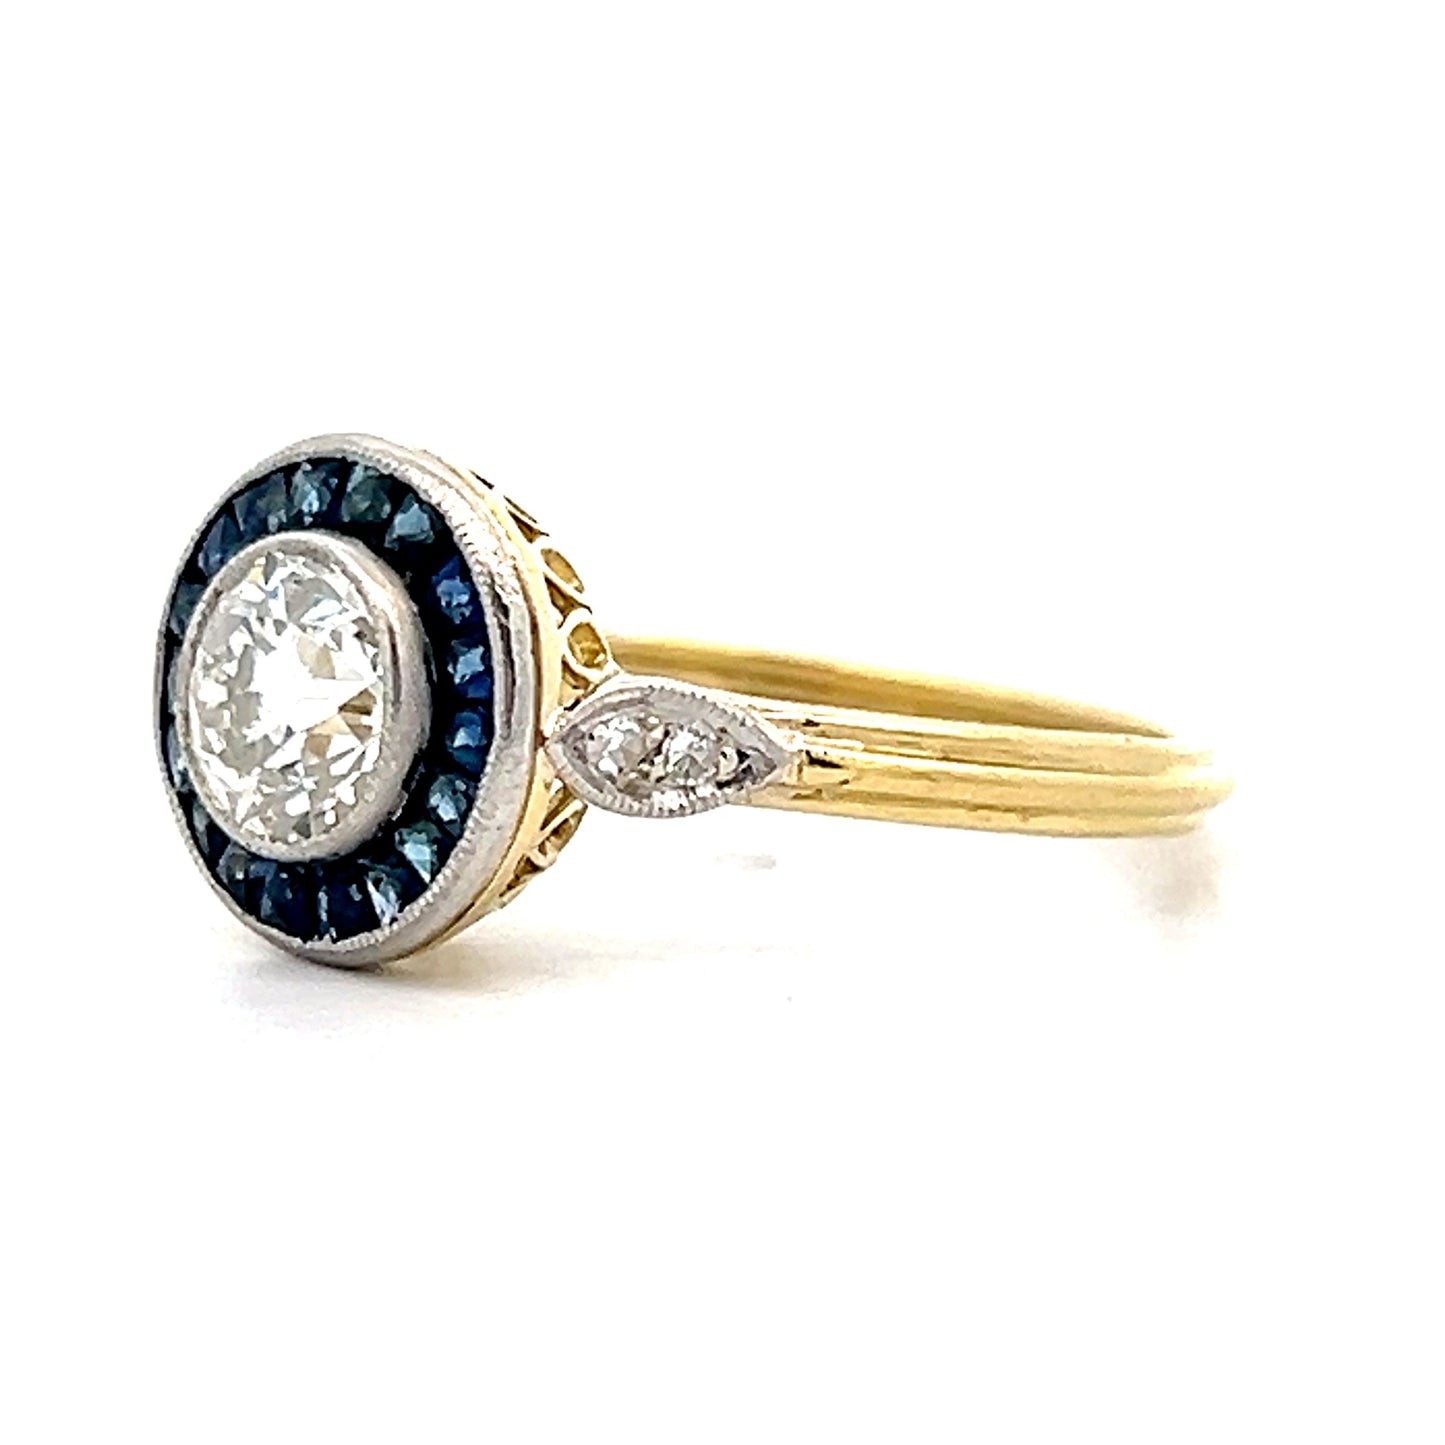 .89 Vintage Art Deco Halo Engagement Ring in 18k Yellow Gold